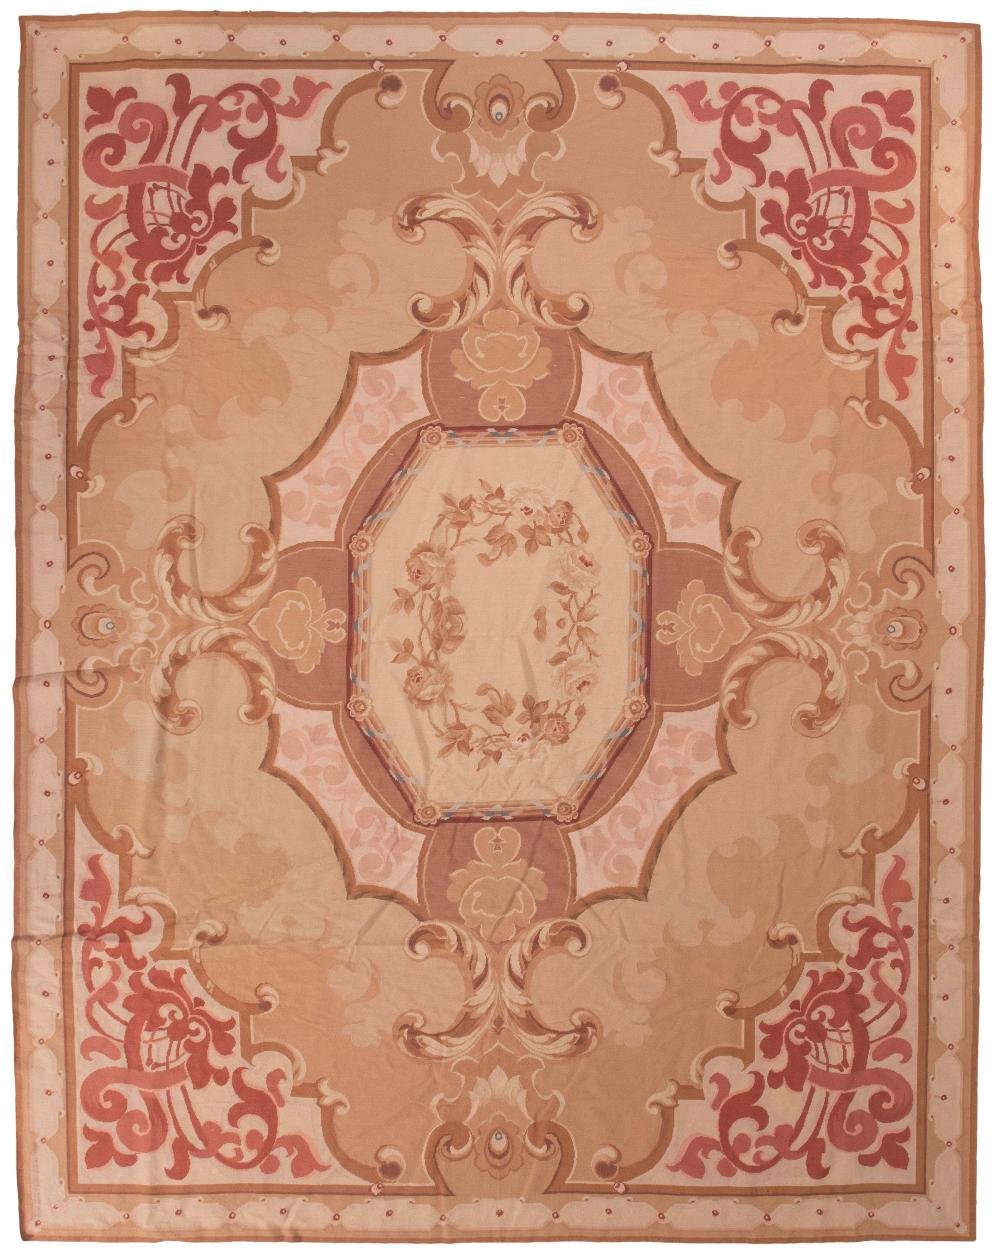 AUBUSSON WOOL TAPESTRY: 8'9" X